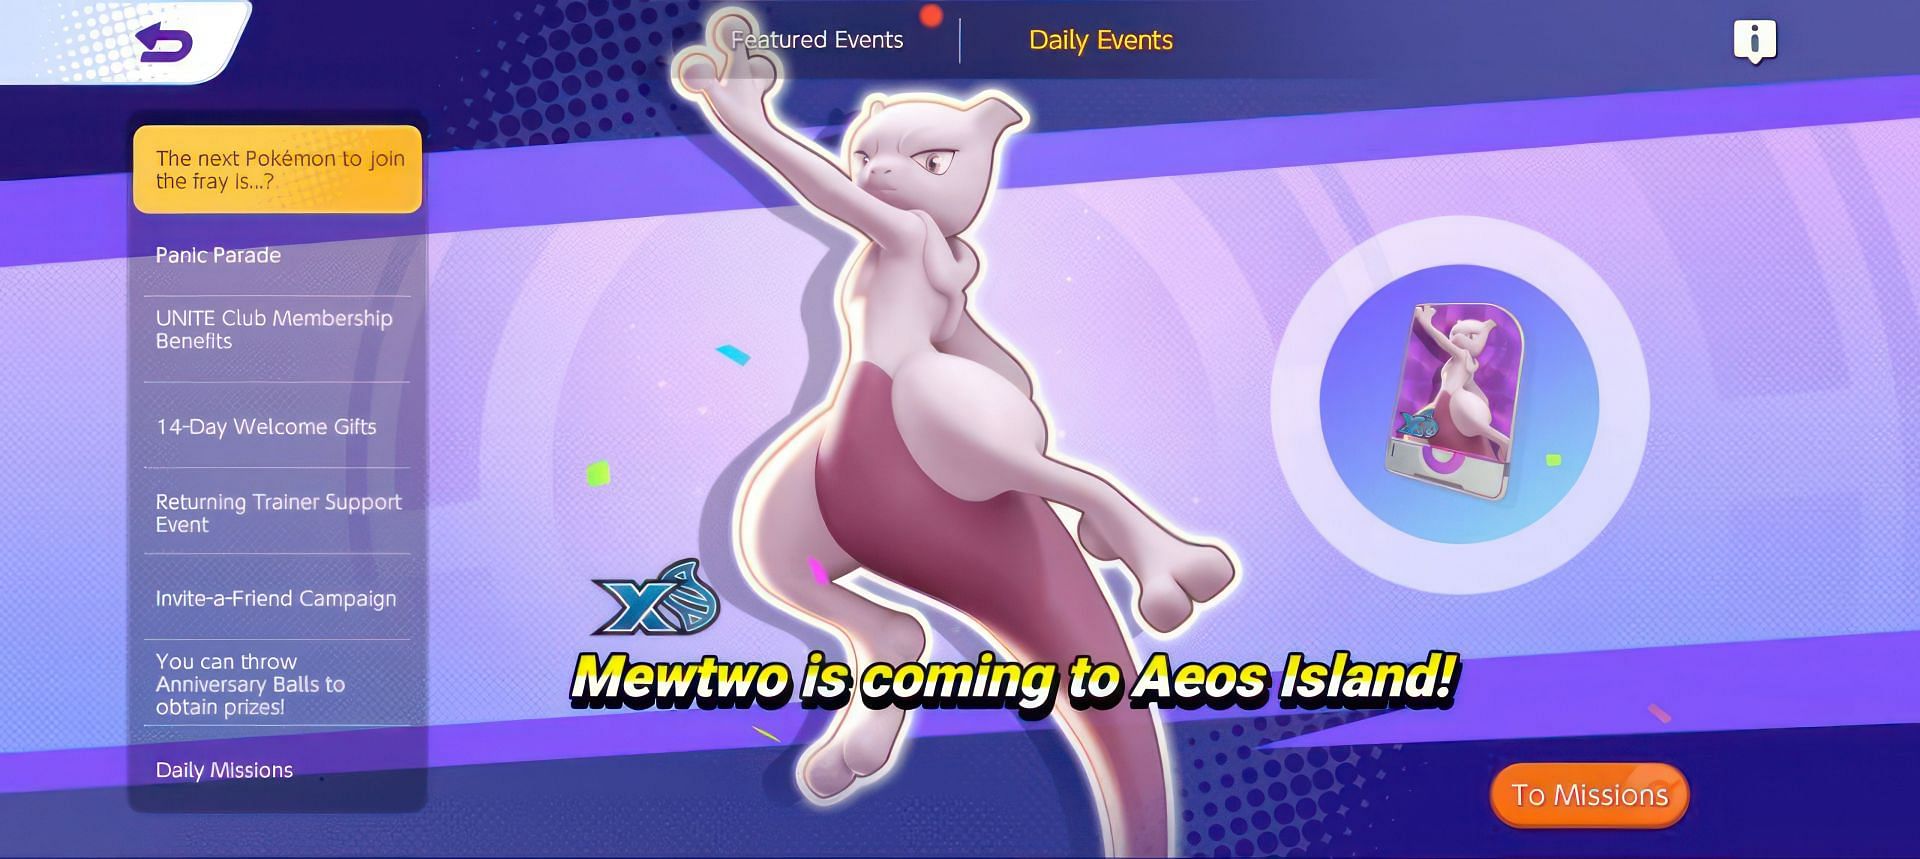 Mewtwo as seen in the event (Image via The Pokemon Company)